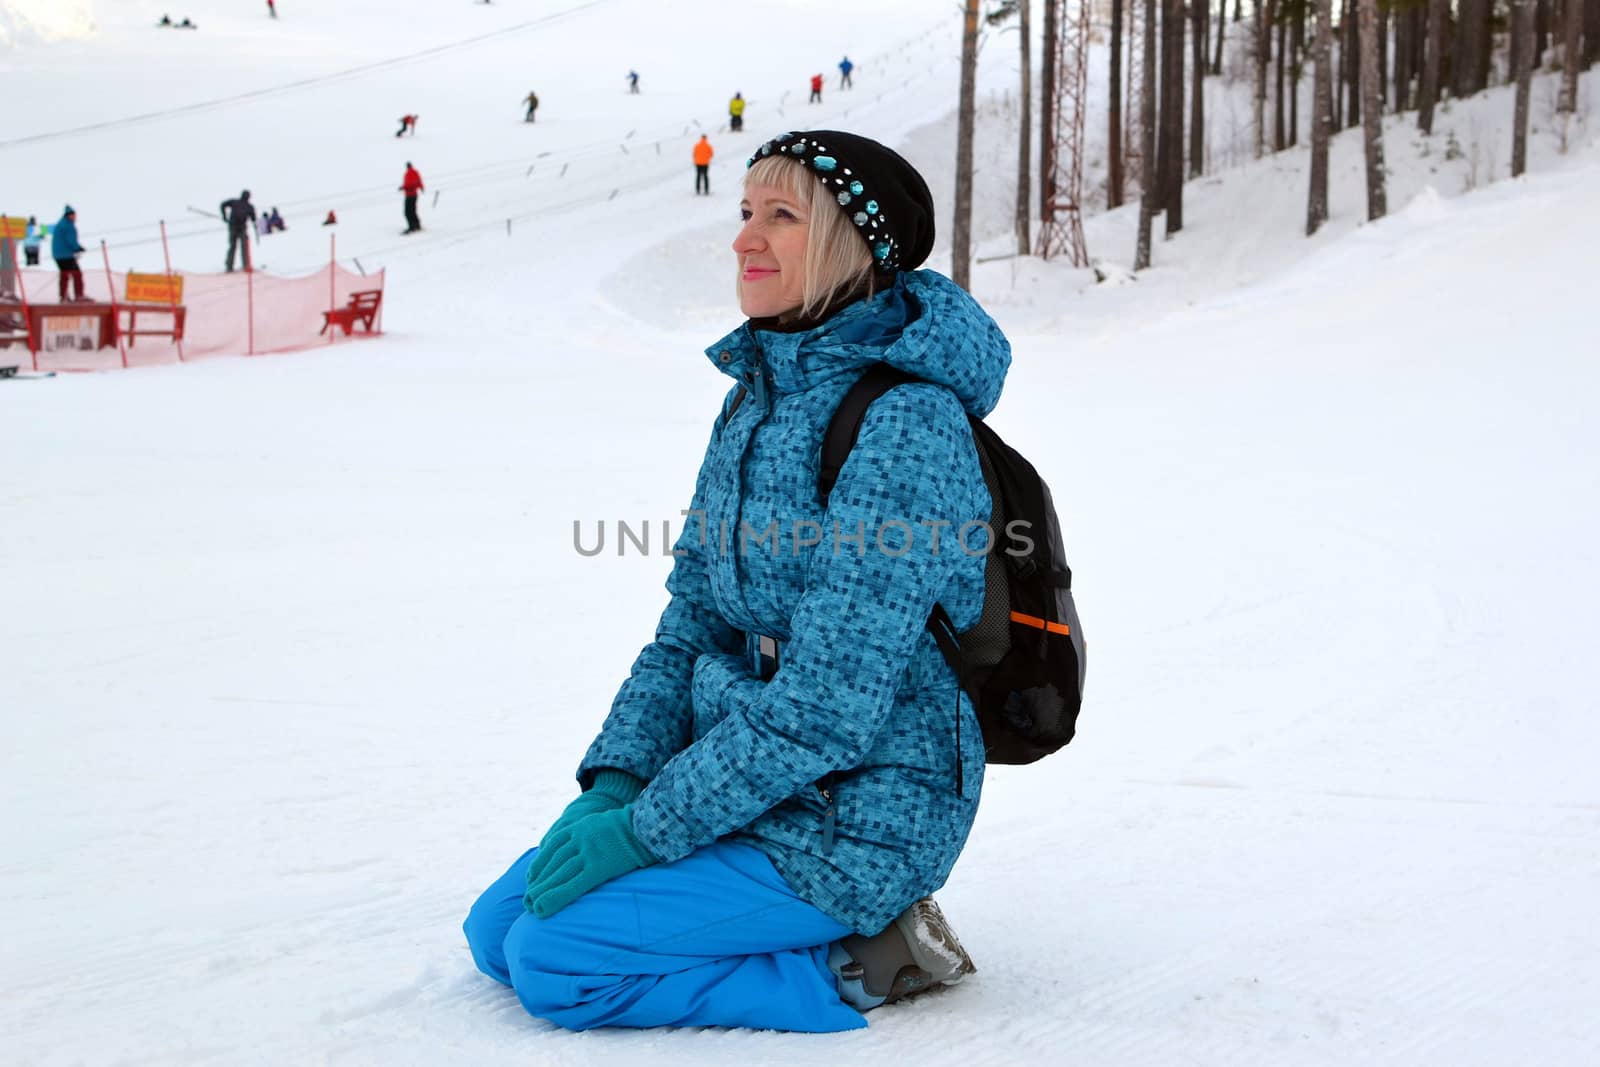 The woman in winter clothes sits on snow against the ski slope. by veronka72